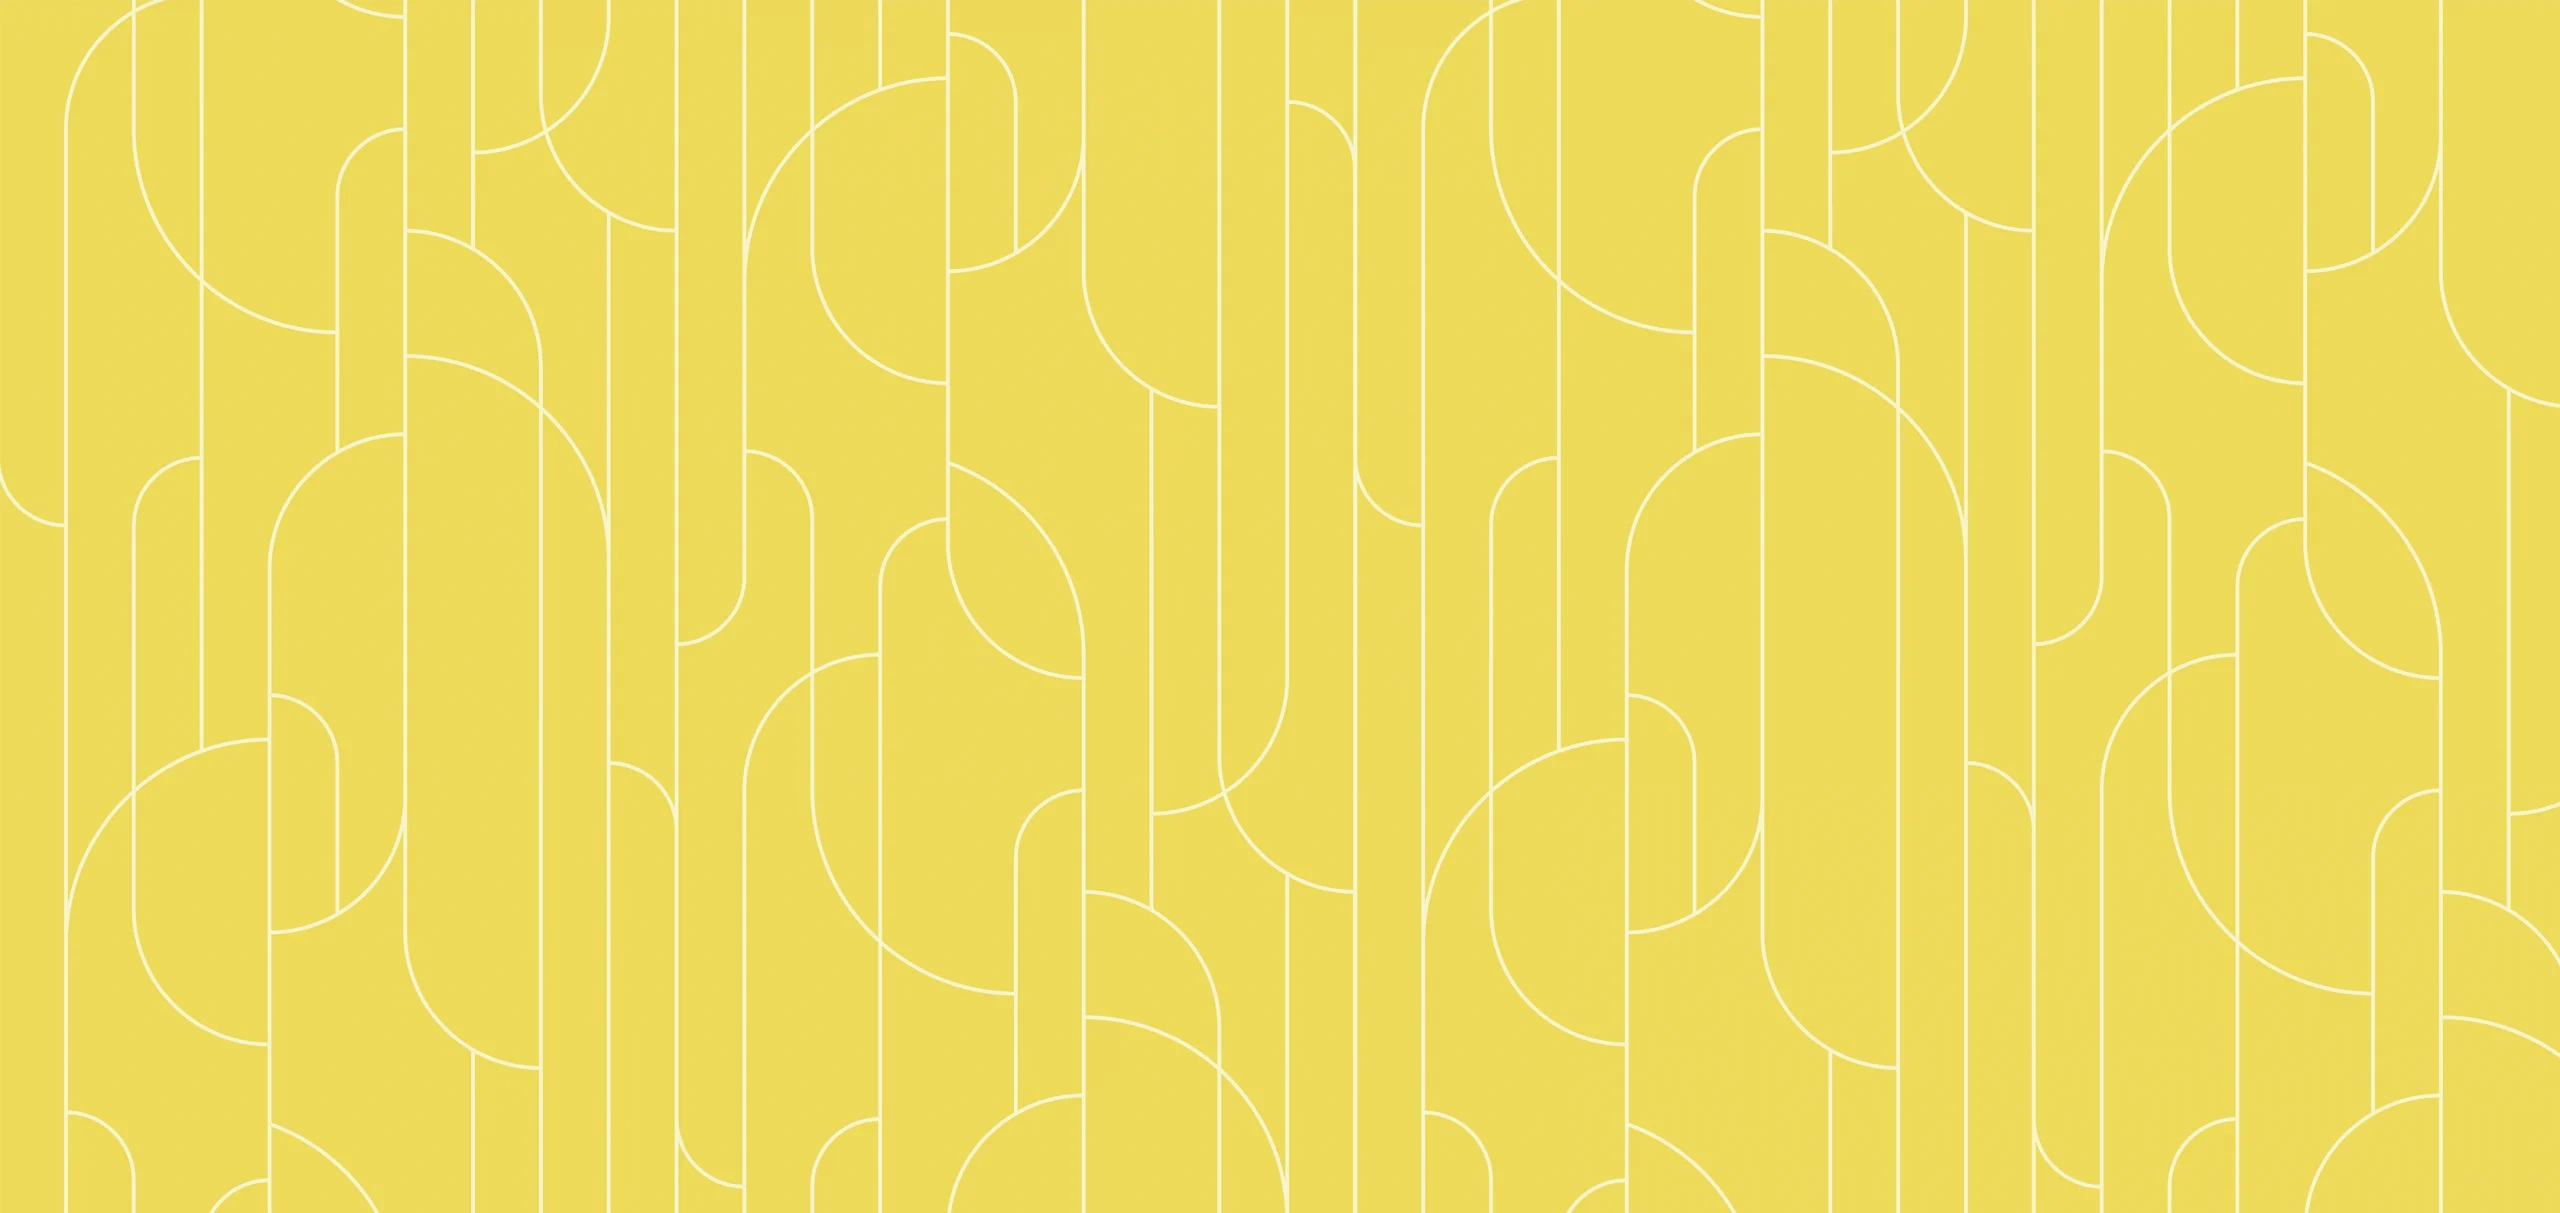 Si Maclennan Collection SM04 Geometric White line and yellow background print, Orms Printroom